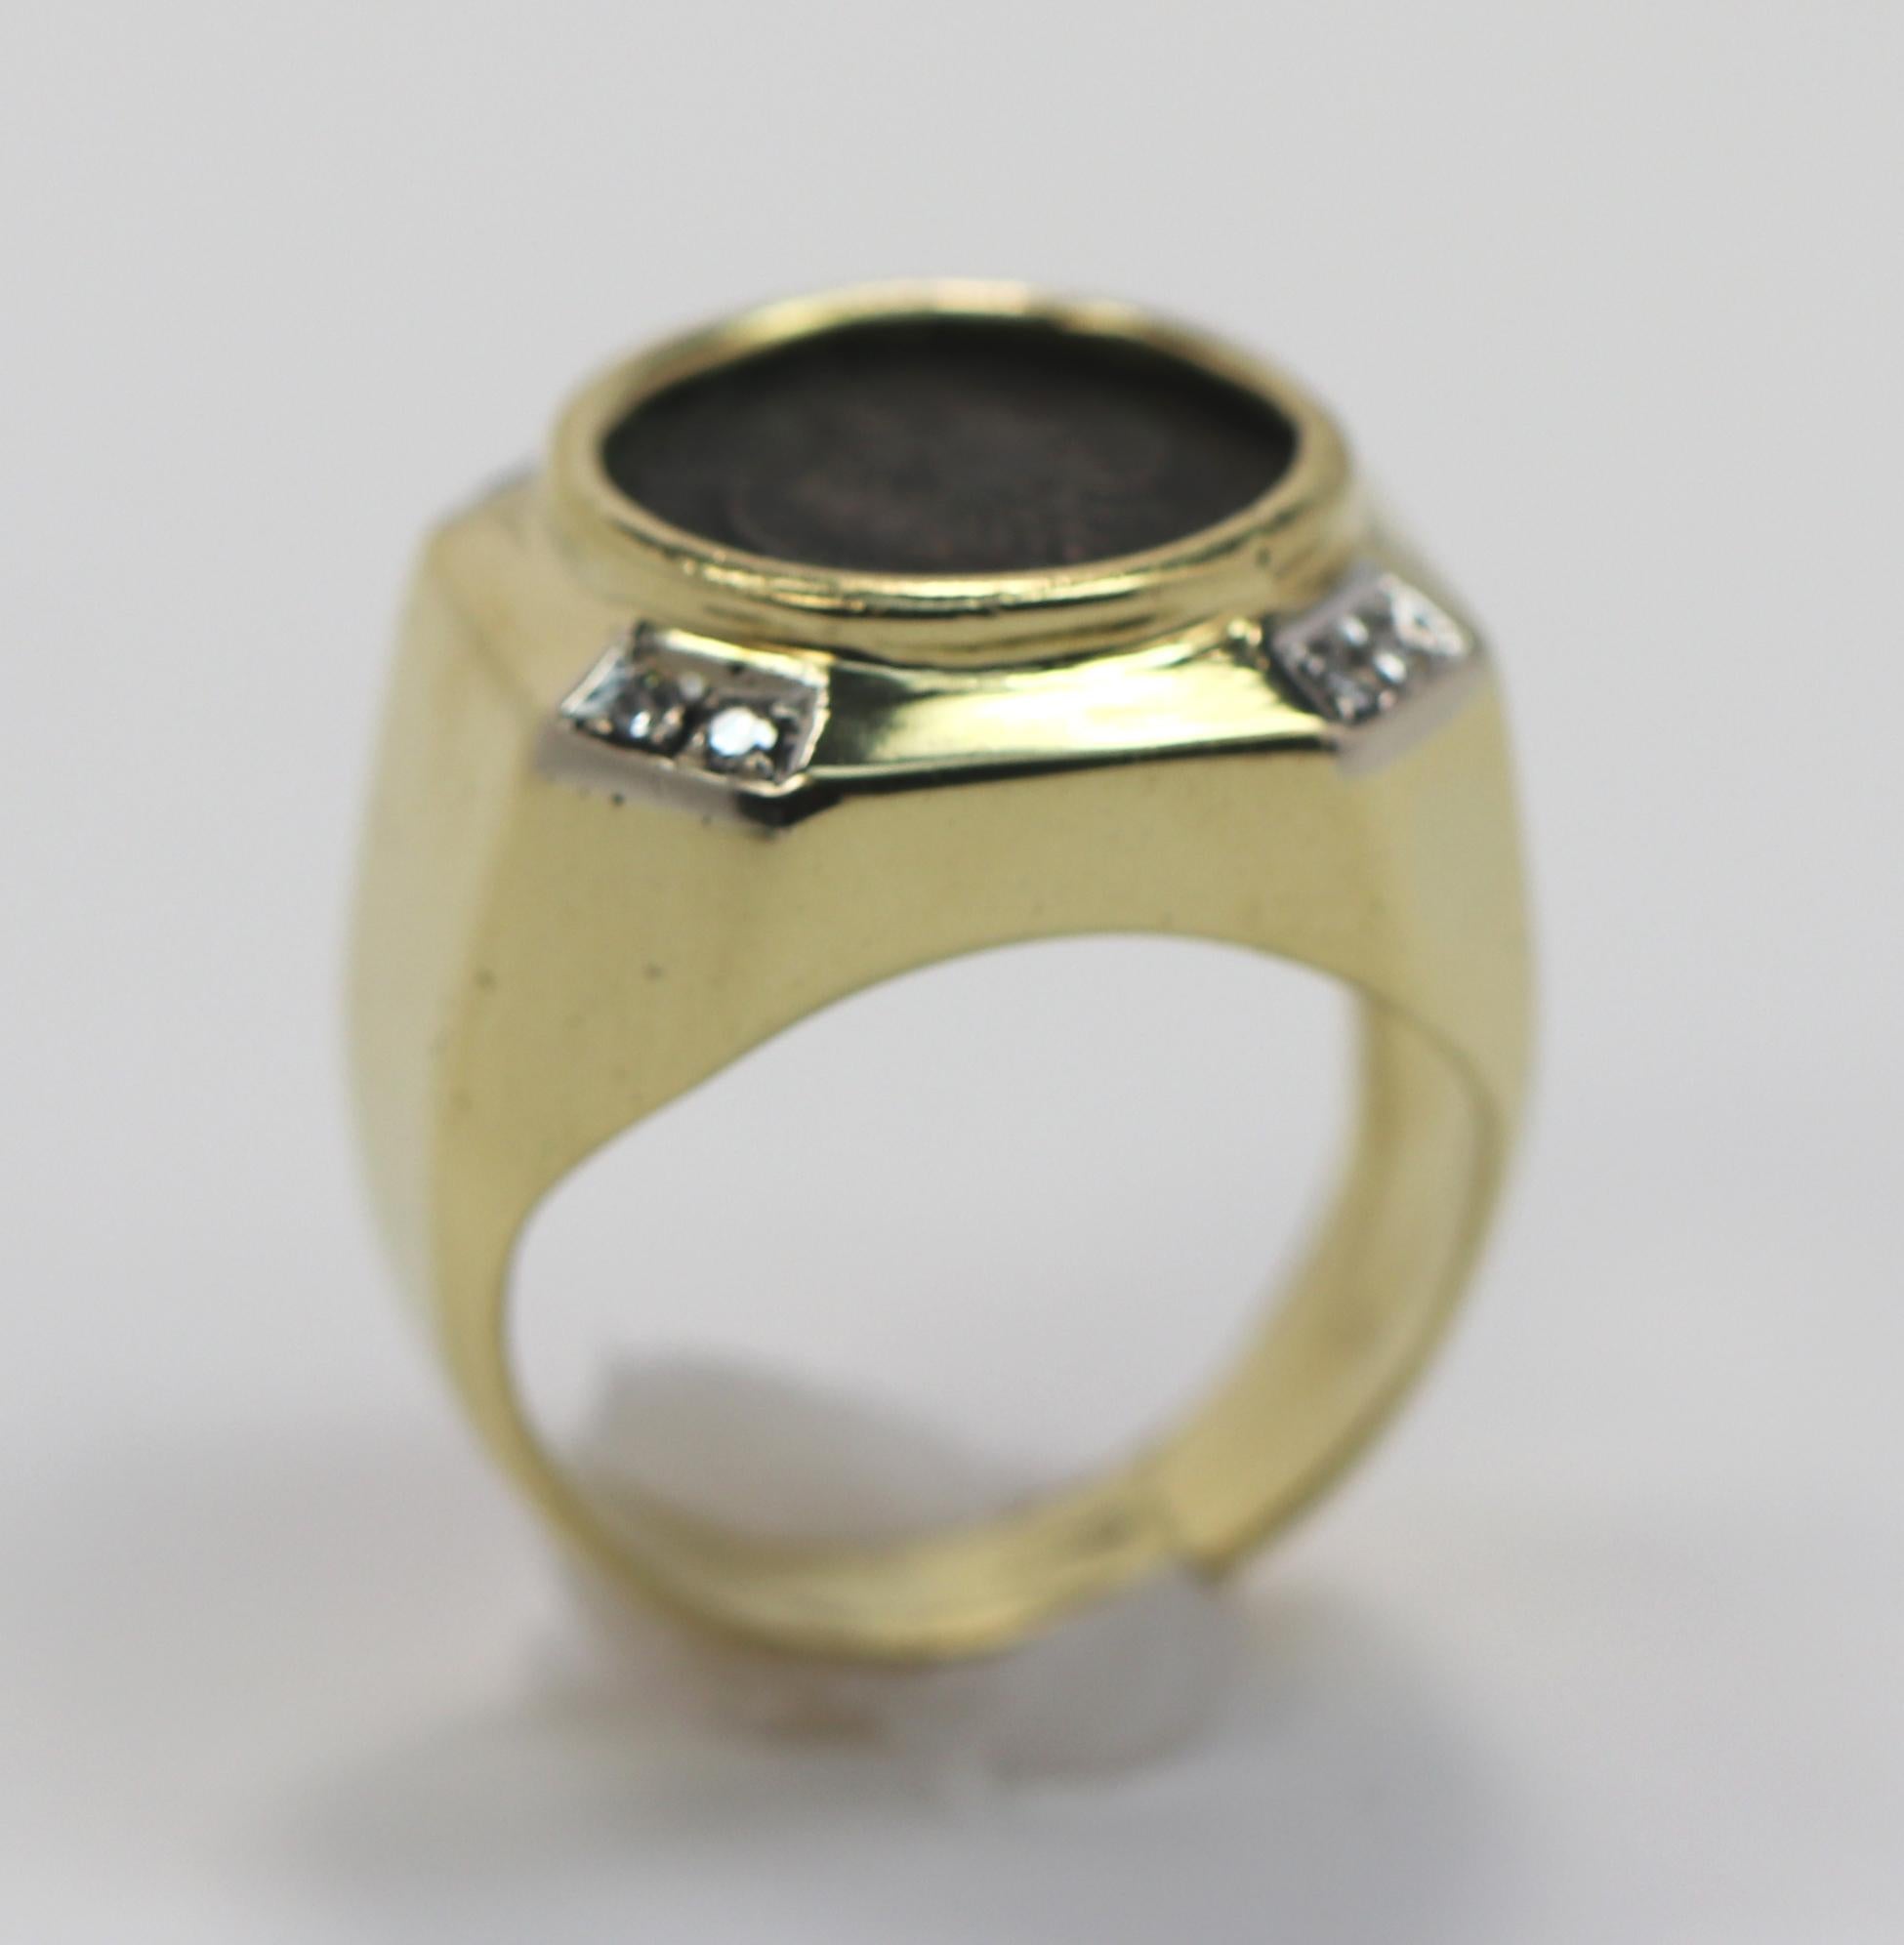 Women's Gold Pinky Ring with Diamonds and Ancient Coin